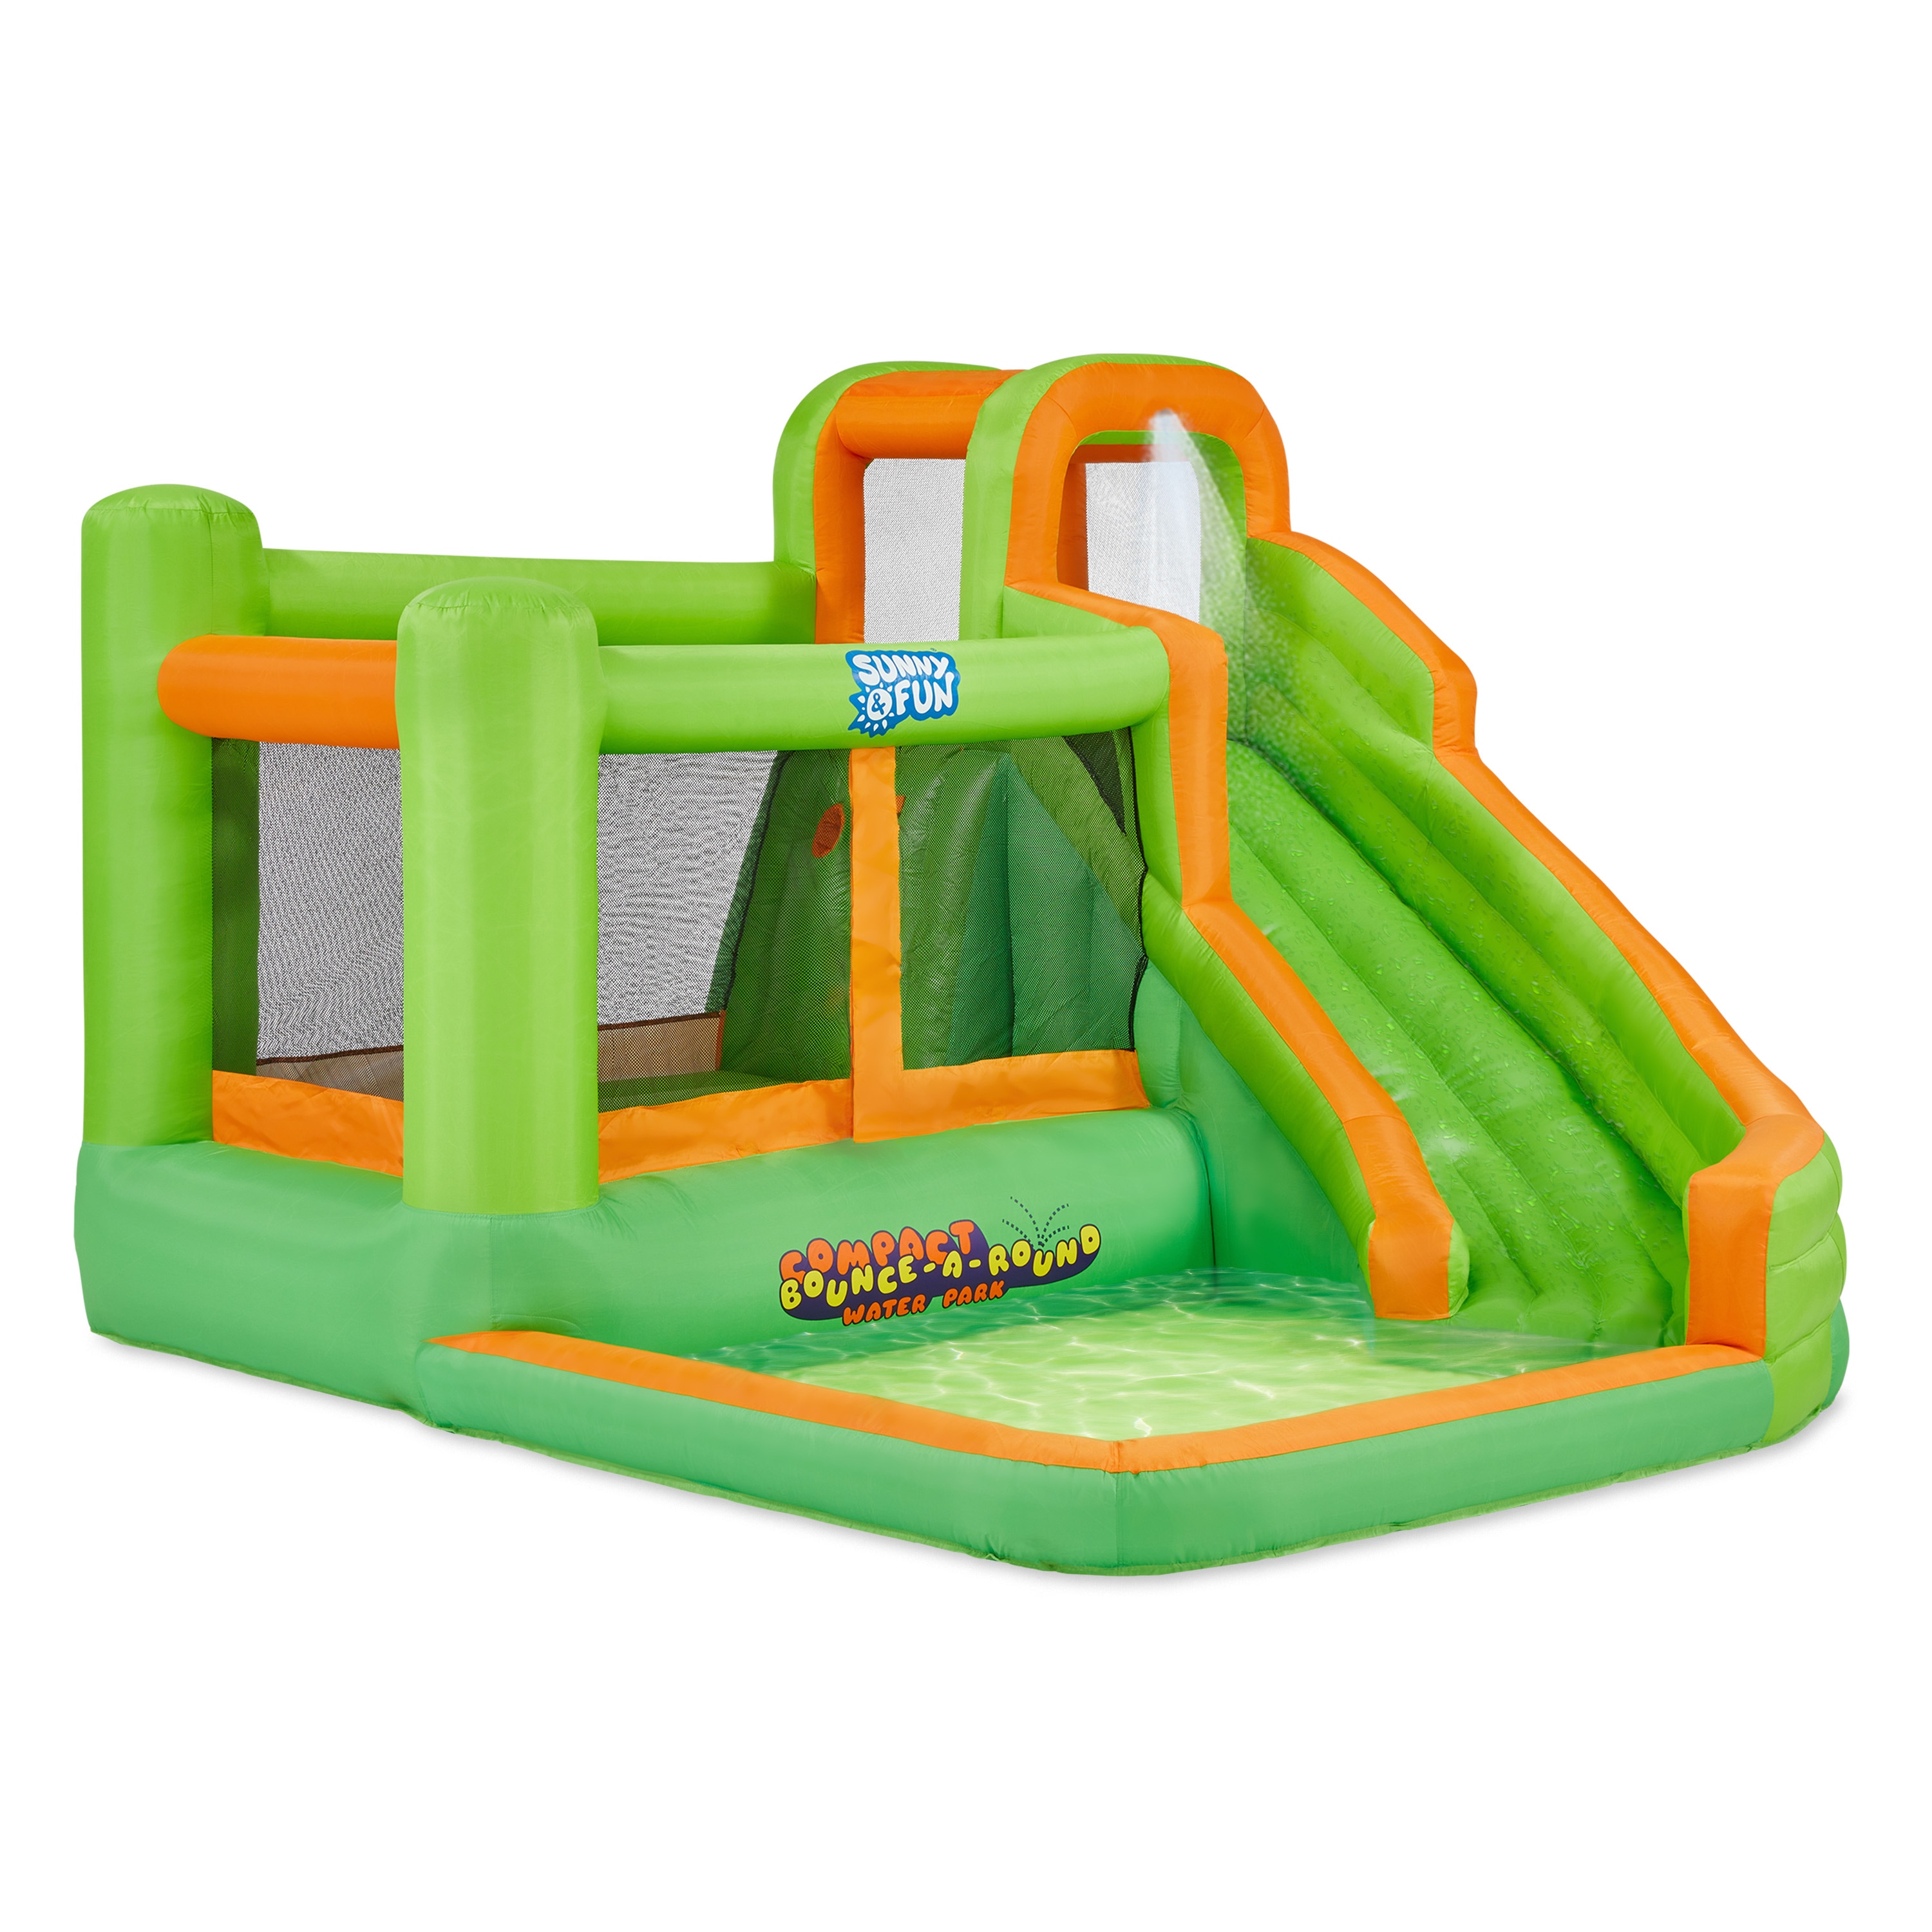 Party Go Round Bounce House Rentals